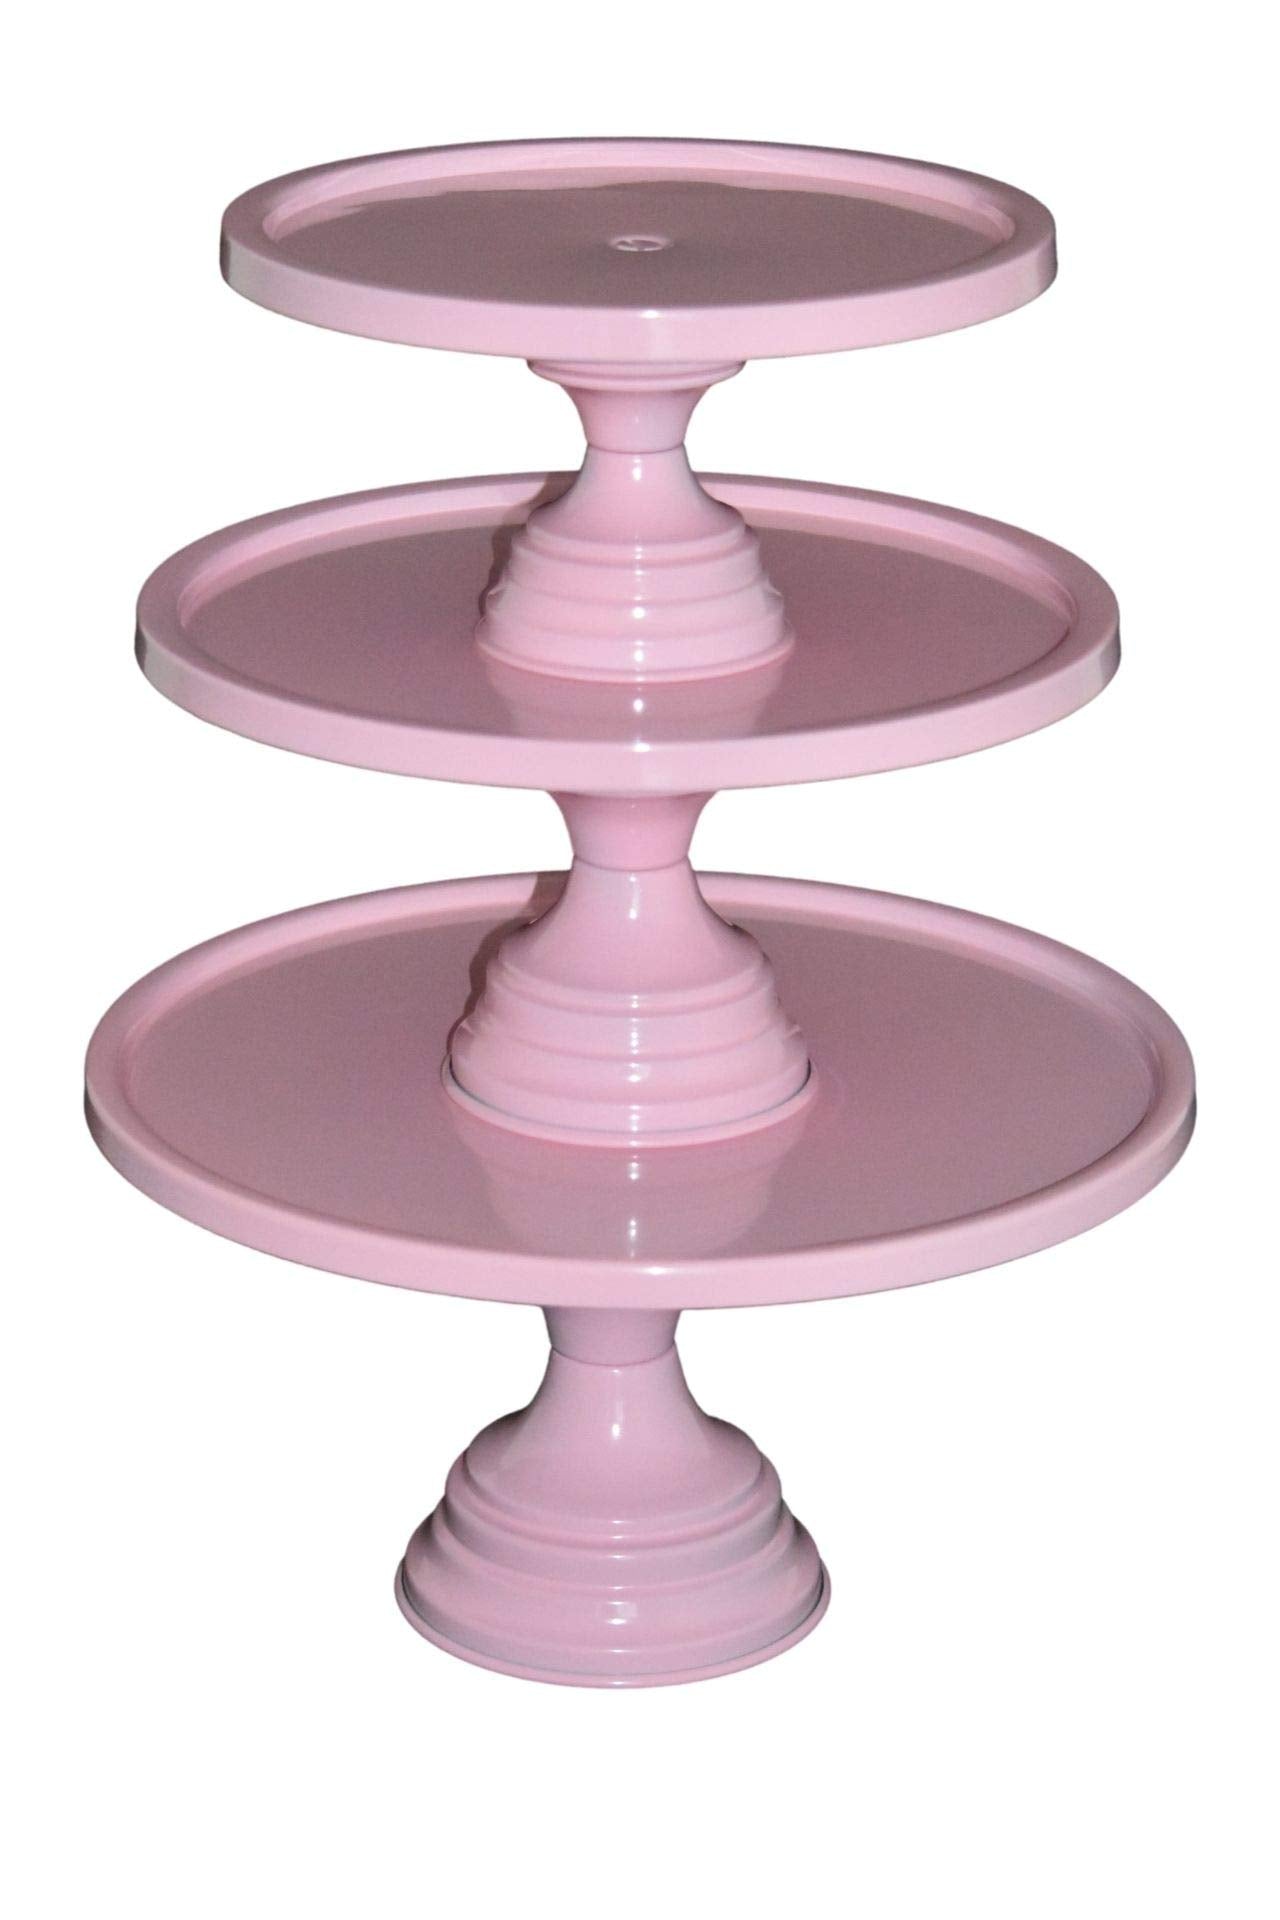 GiftBay Creations - Cake Stand Pedestal Round Strong Metal Set/3 (9-Inch, 11-Inch, 13-Inch, Pink)